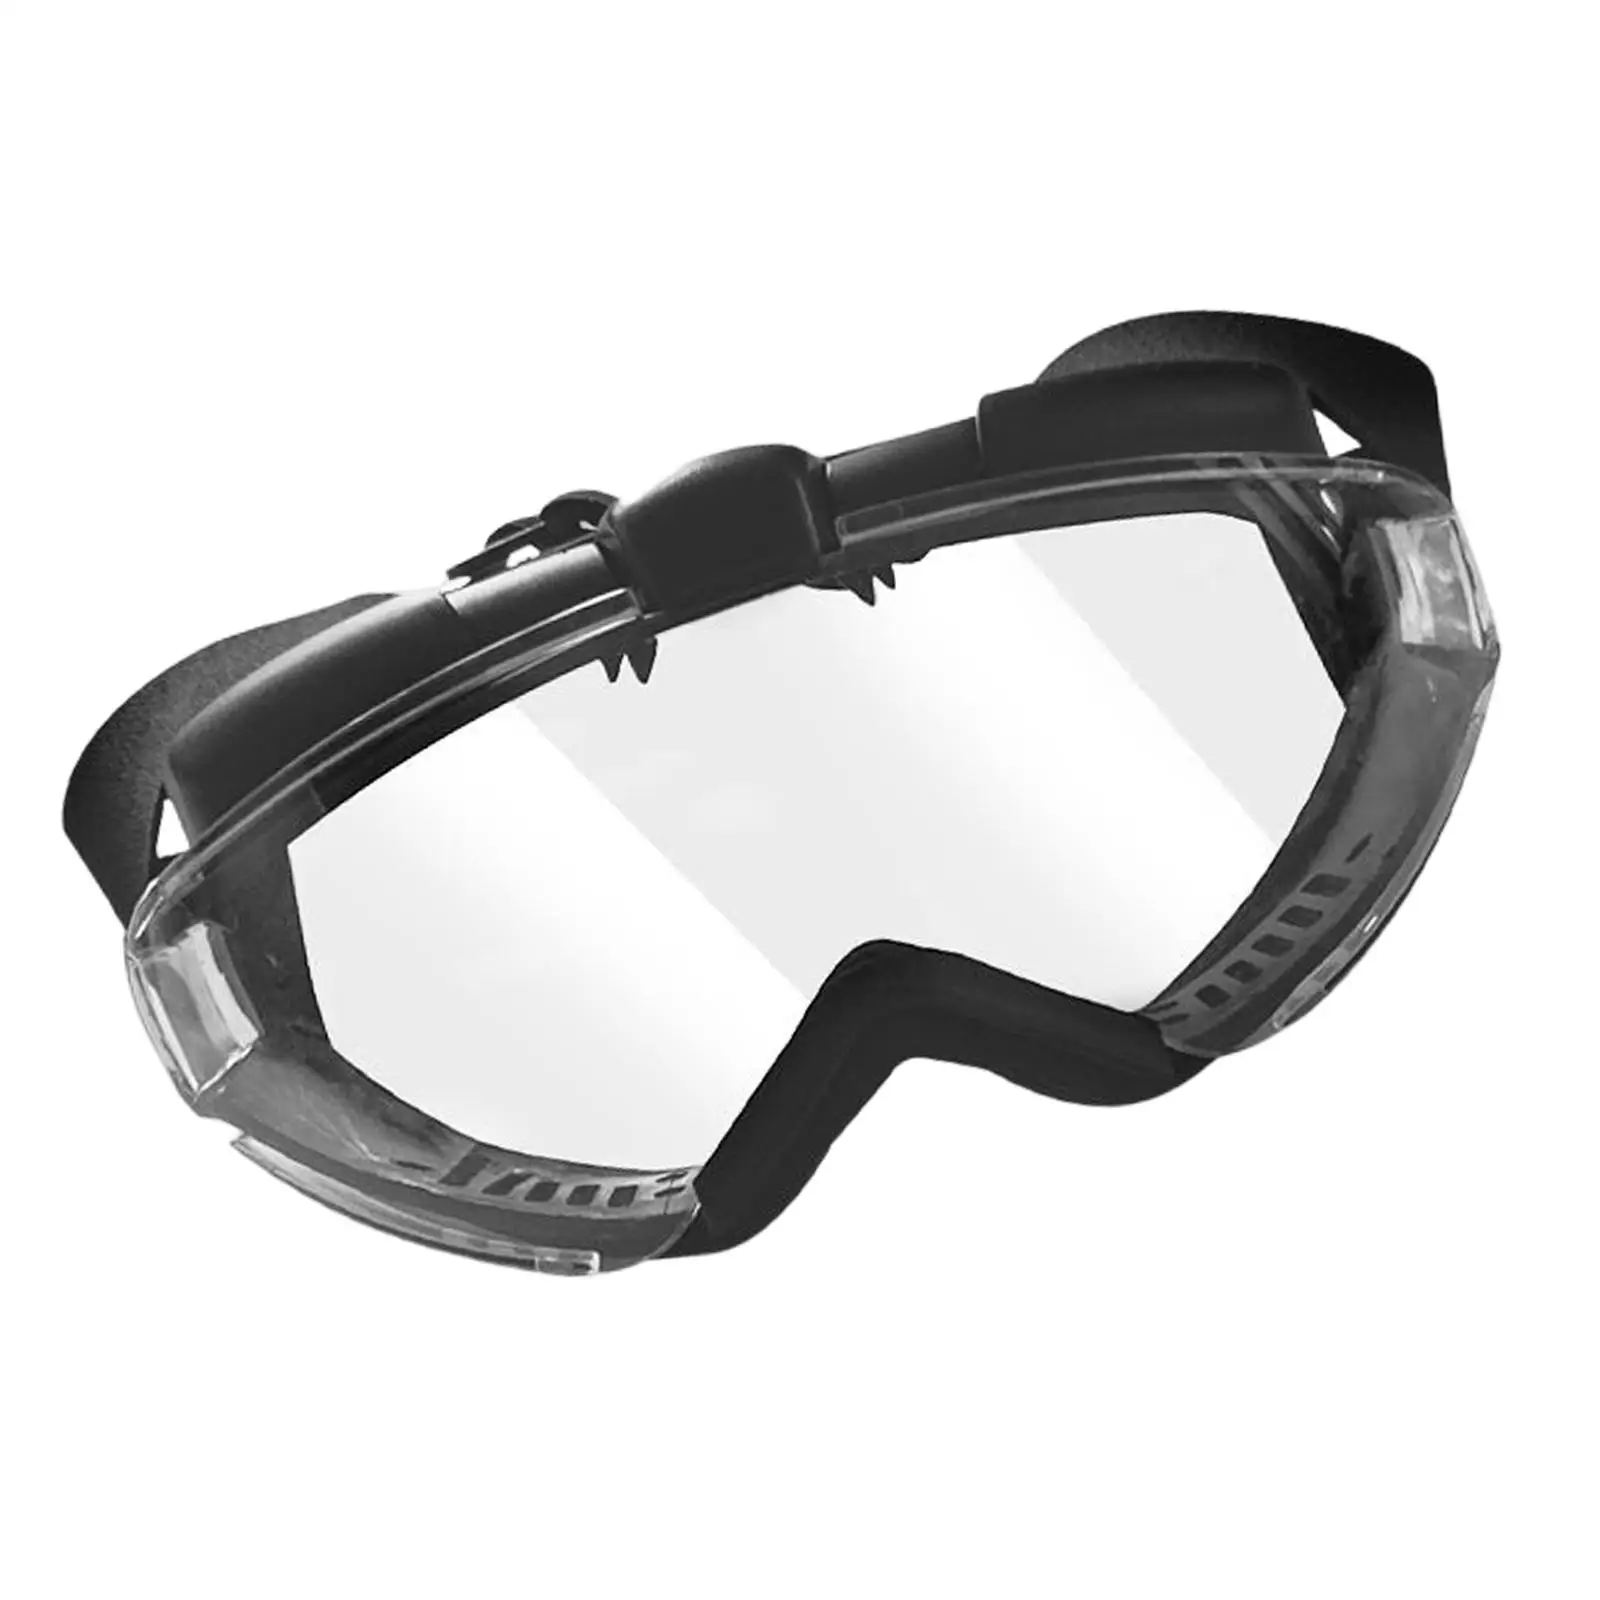 Outdoor Glasses Eye Protection with Adjustable Strap Men Women Windproof Goggles